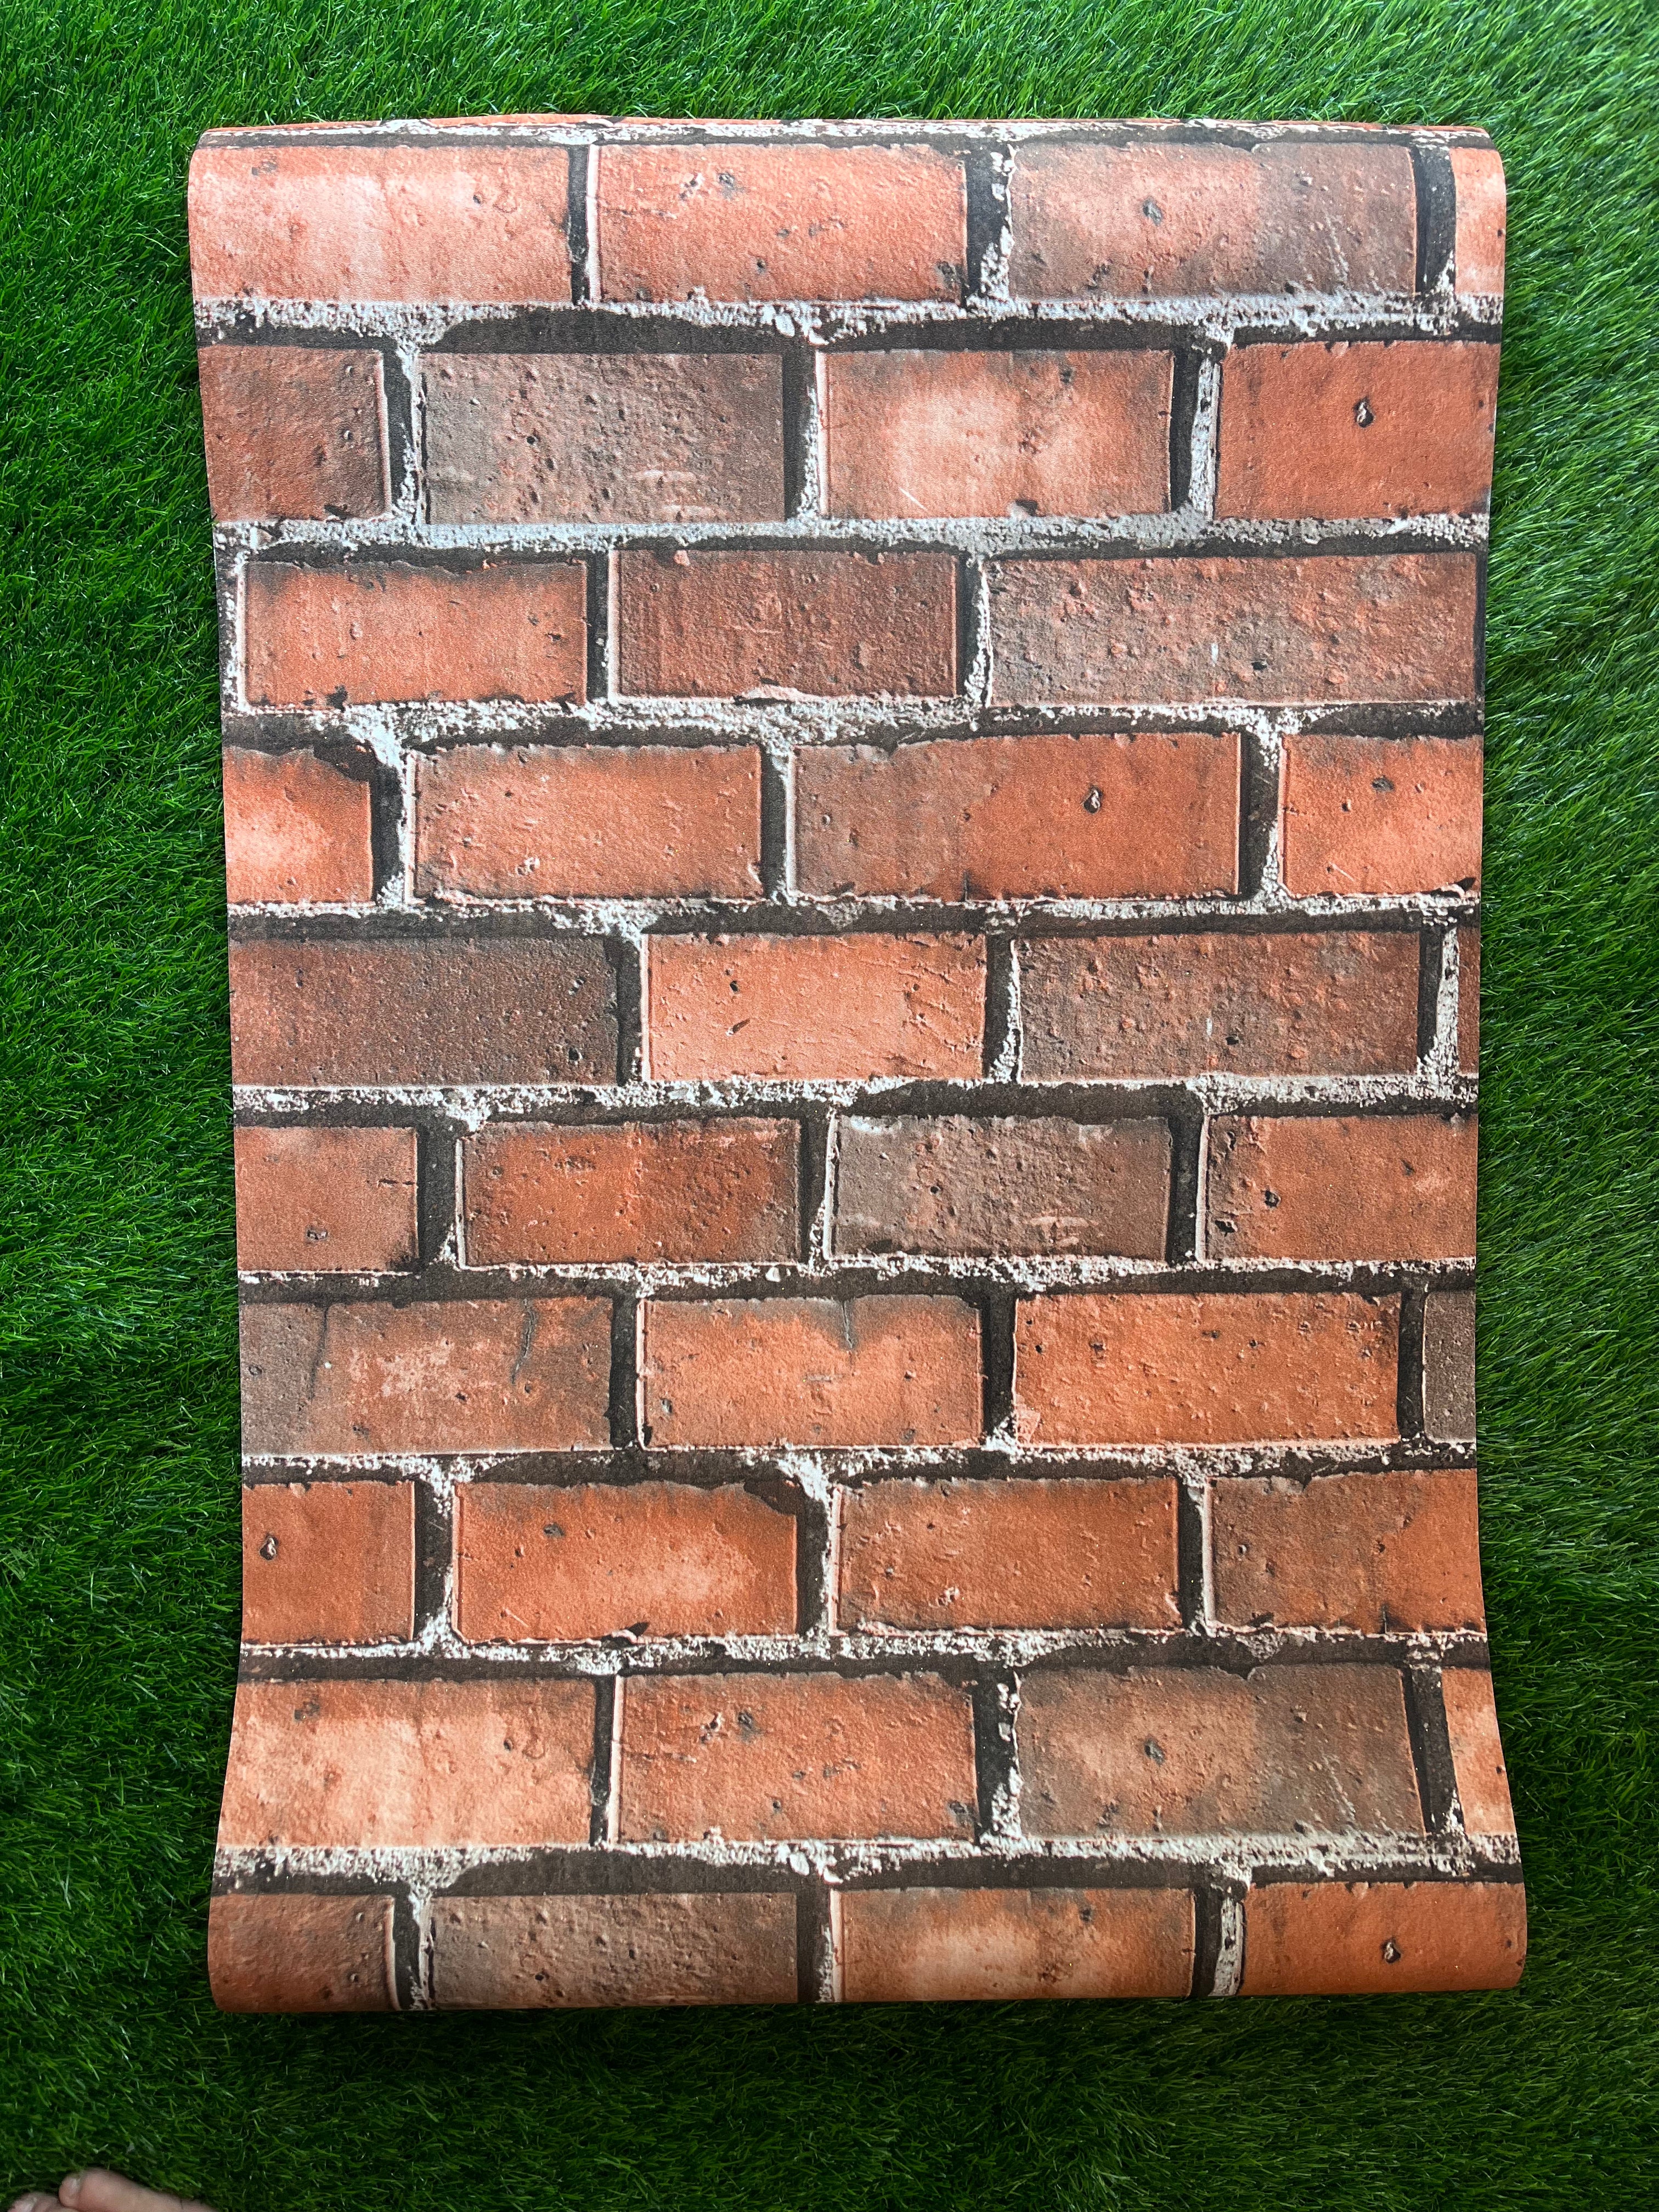 Red Bricks  pattern  Not Self Adhesive 53 Cm X 1000 Cm for PVC Vinyl Coated for Wall Bedroom Living Room Latest Stylish for Home Decoration ( 57 Sqft Roll) (AW-19)